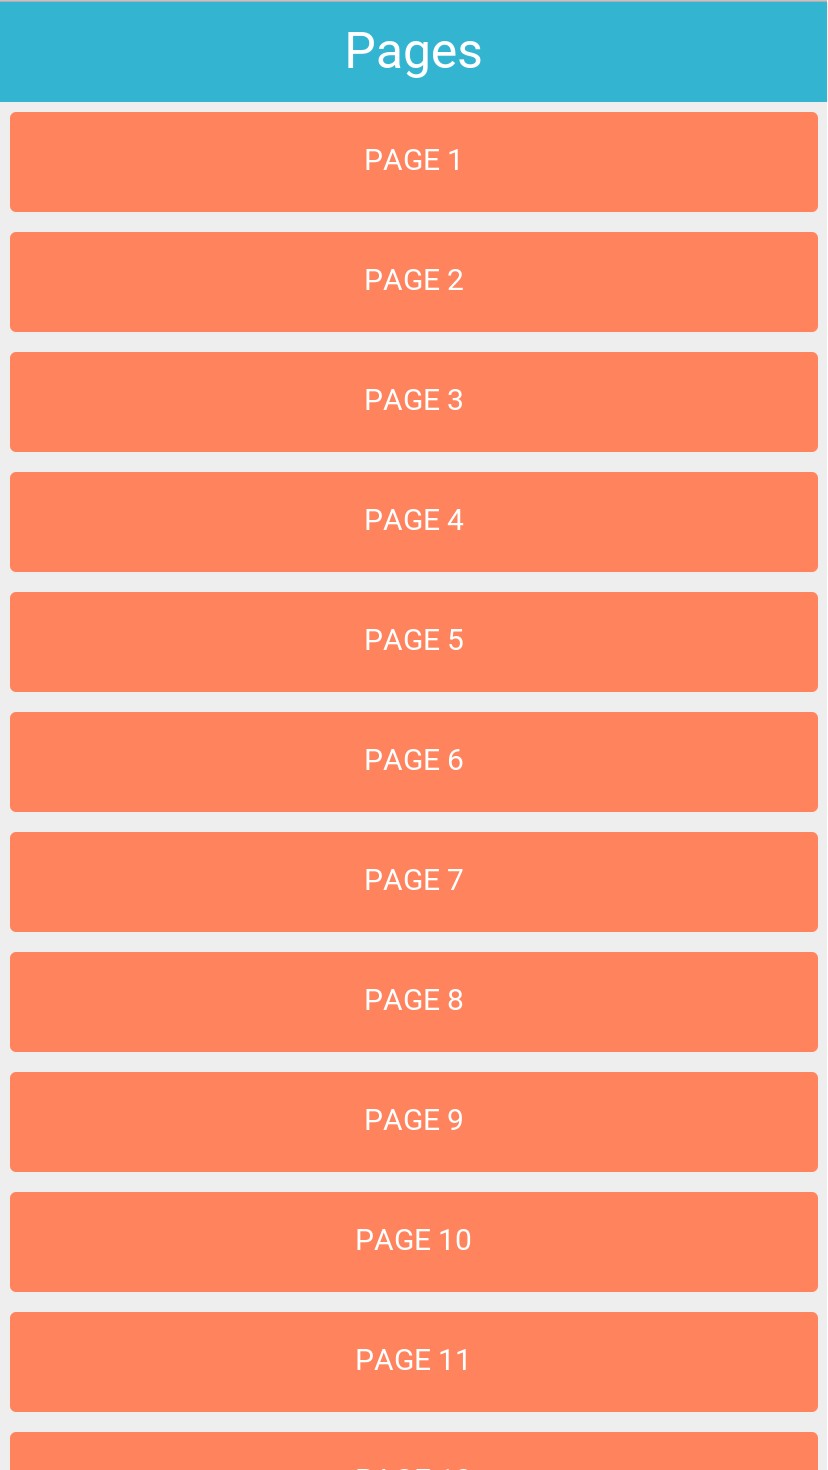 Pages using JavaScript